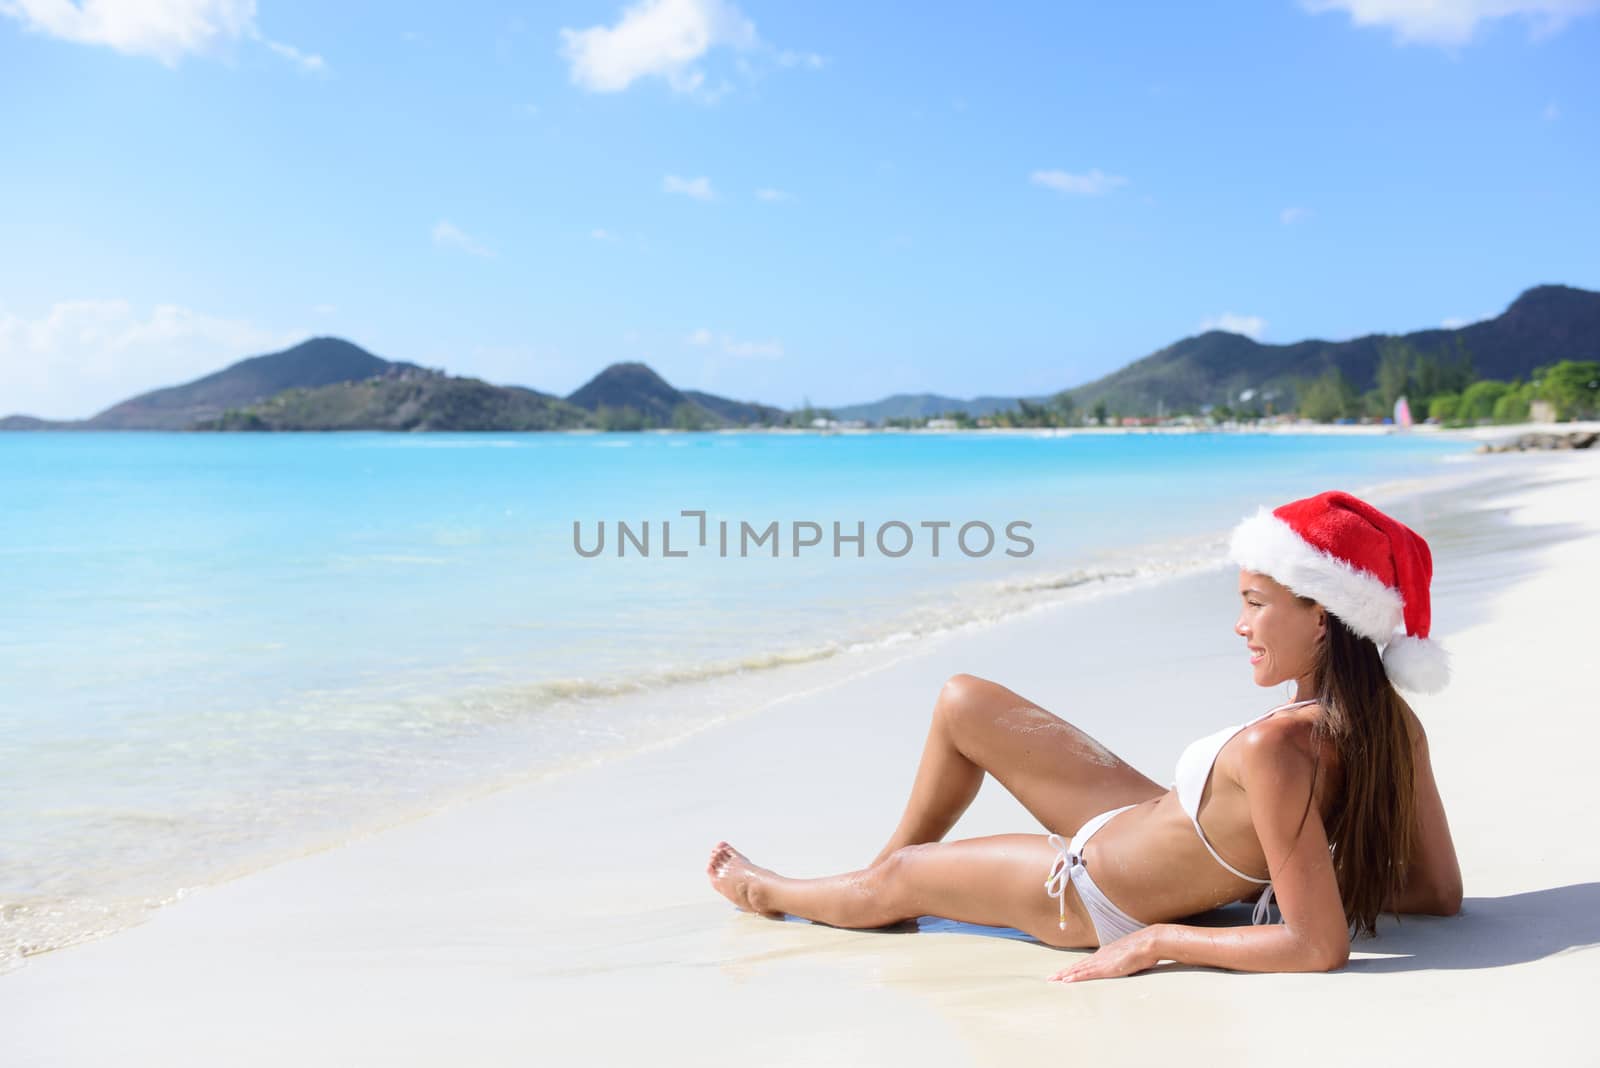 Christmas beach woman in santa hat and bikini on holidays travel vacation getaway relaxing on beautiful tropical beach with turquoise water in the Caribbean. Beautiful young female model sun tanning.